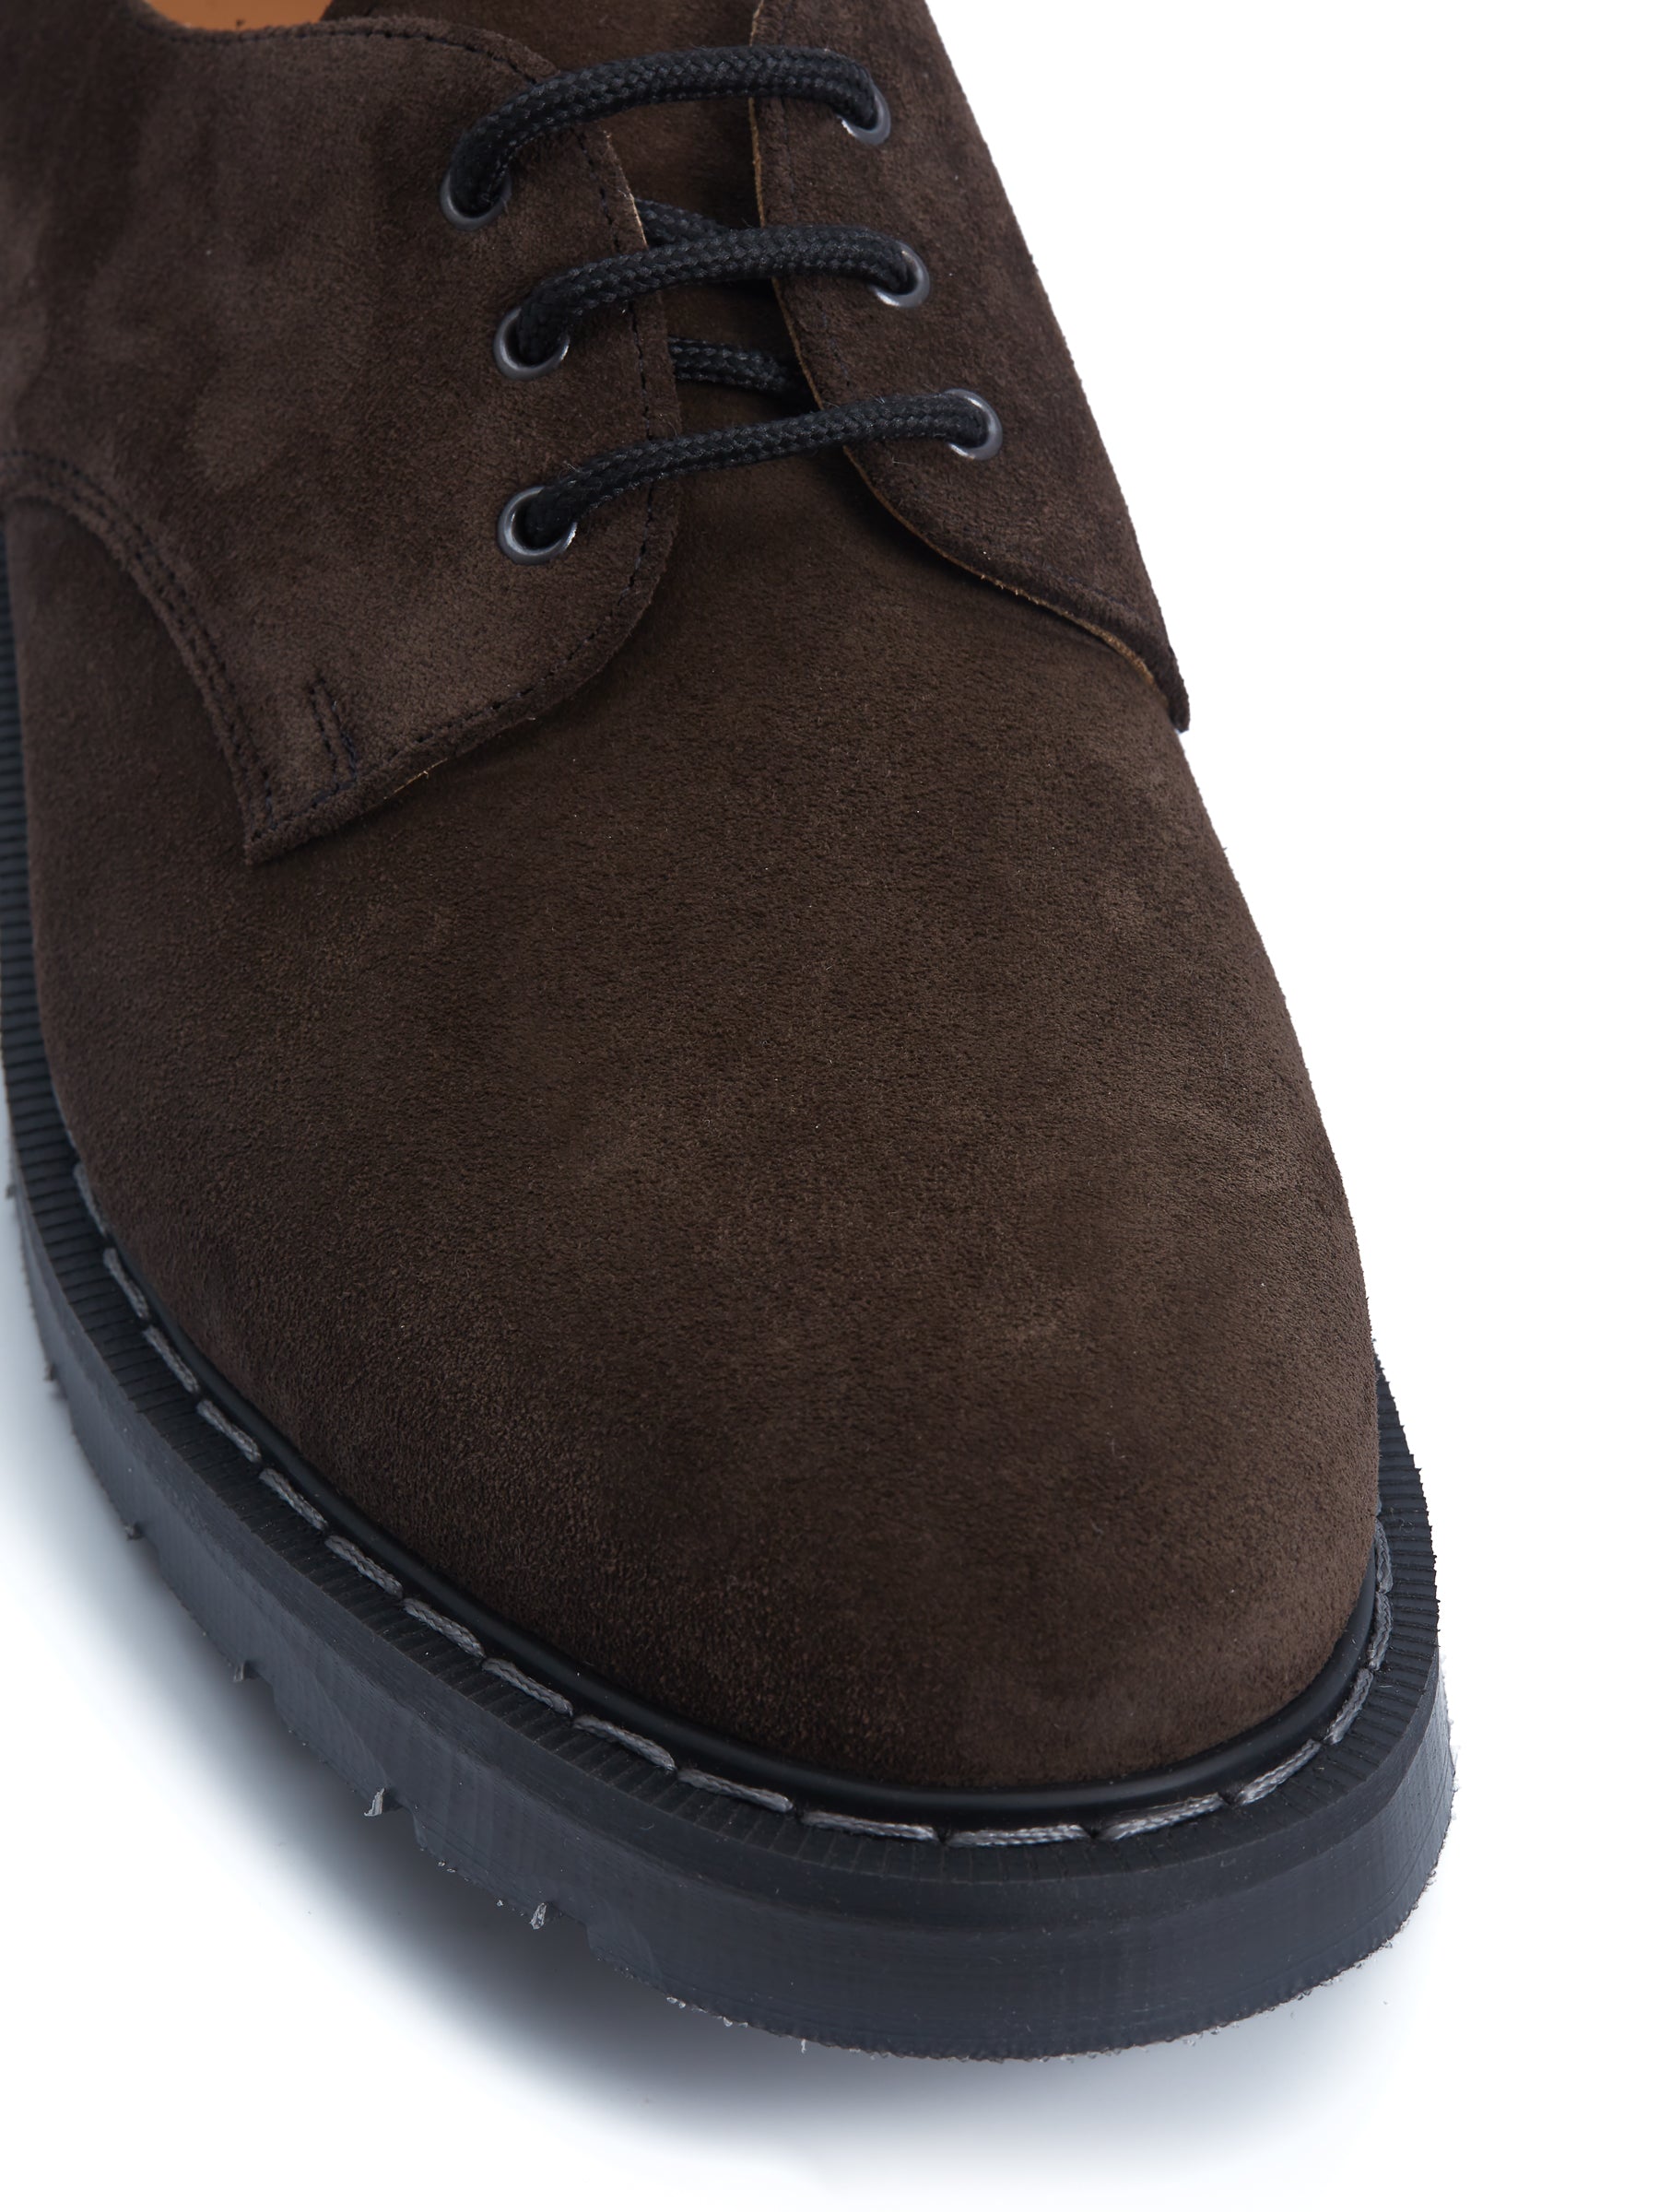 Solovair x Oliver Spencer Brown Suede 3-eye Gibson Shoes